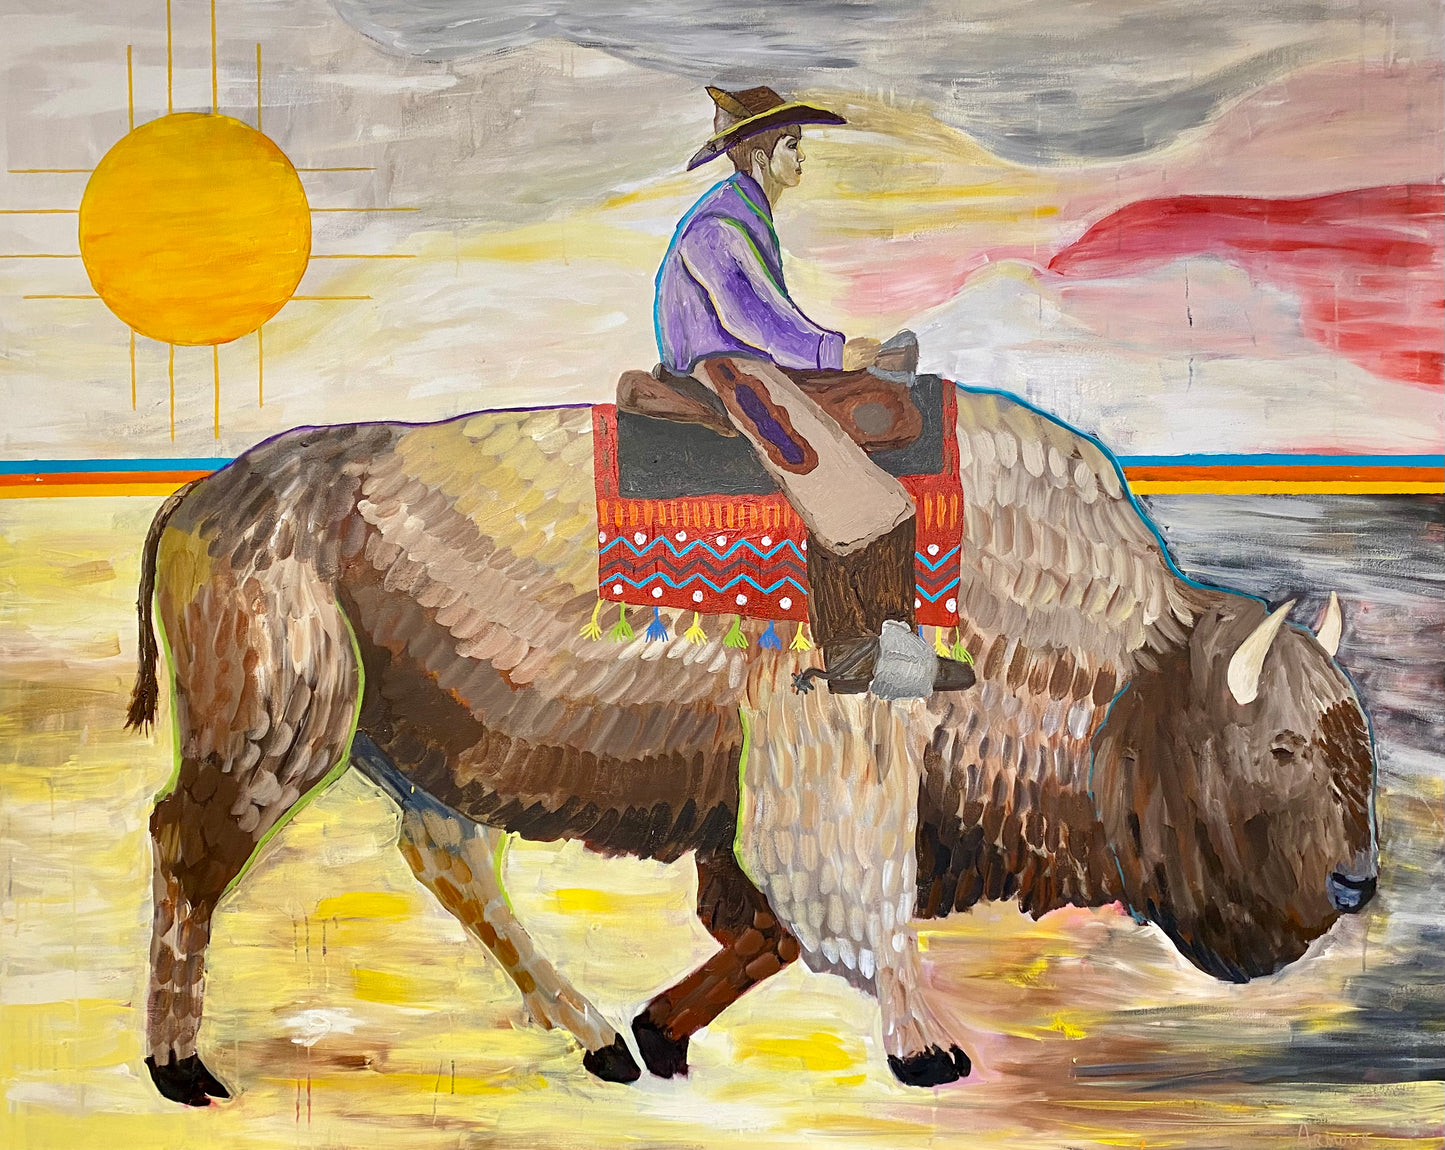 Cowboy and Bison, 48" x 60"